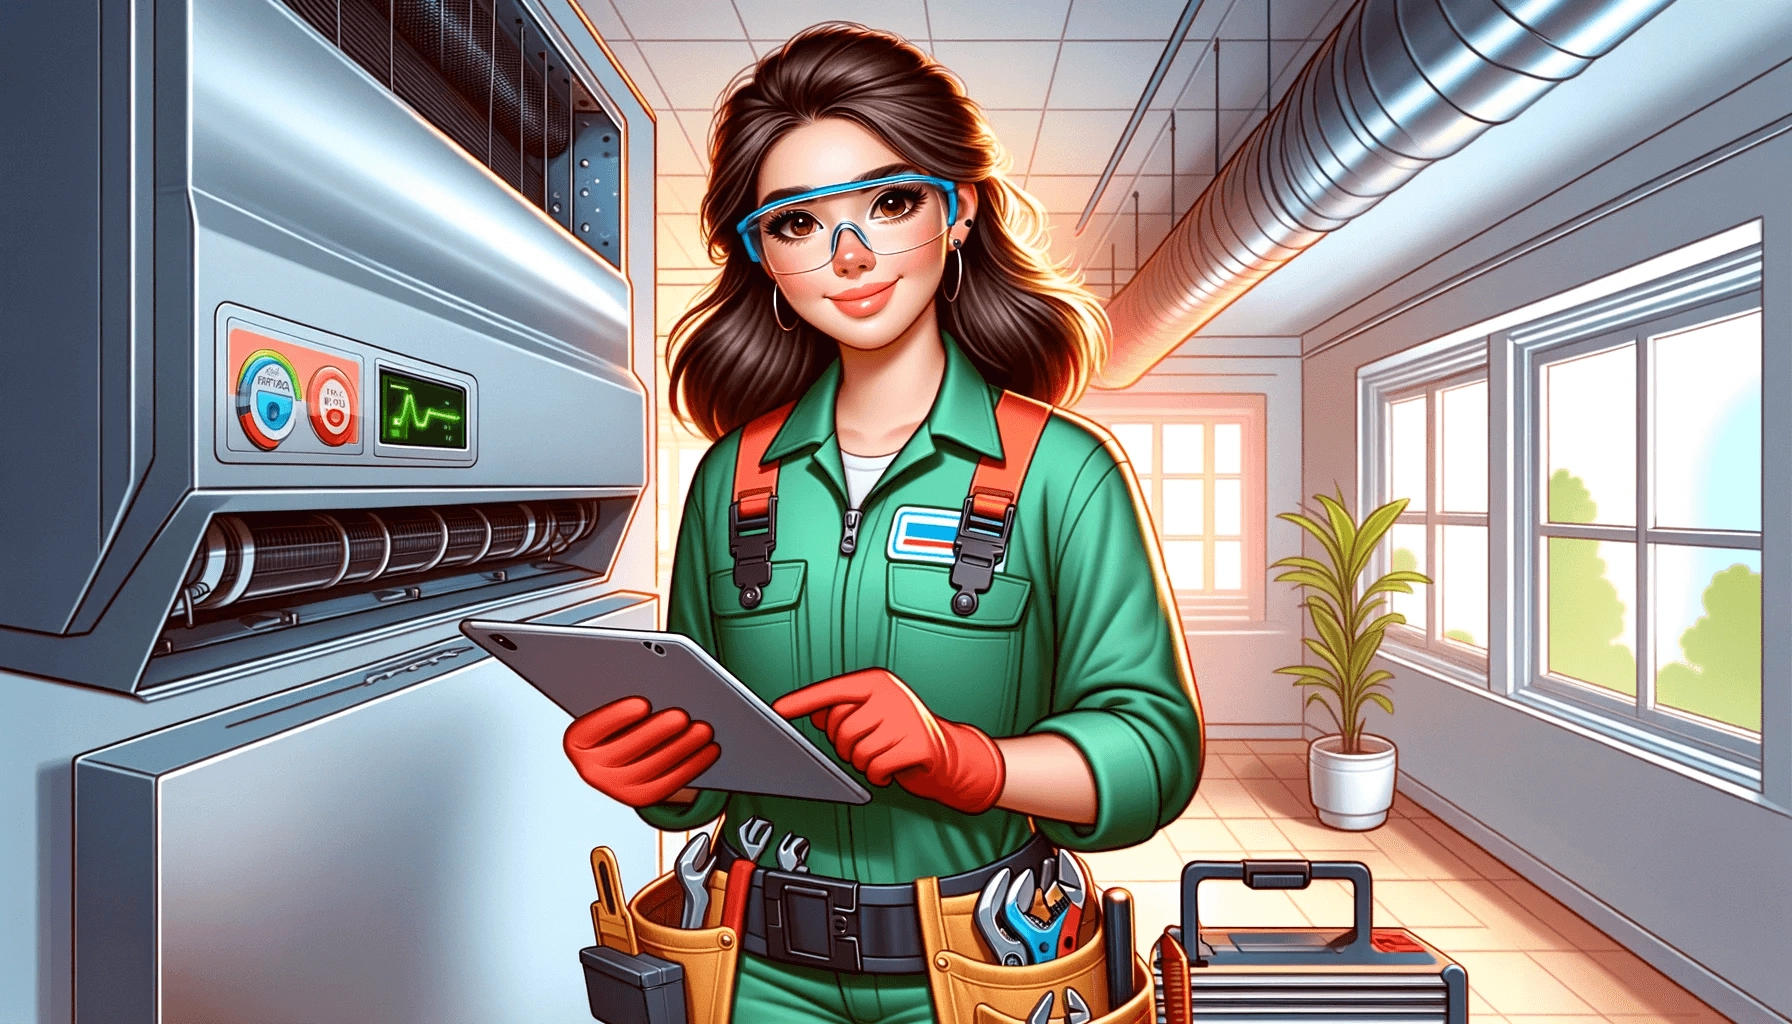 illustration showcases a young Hispanic female technician in a green uniform, working on a heating system in an office environment.